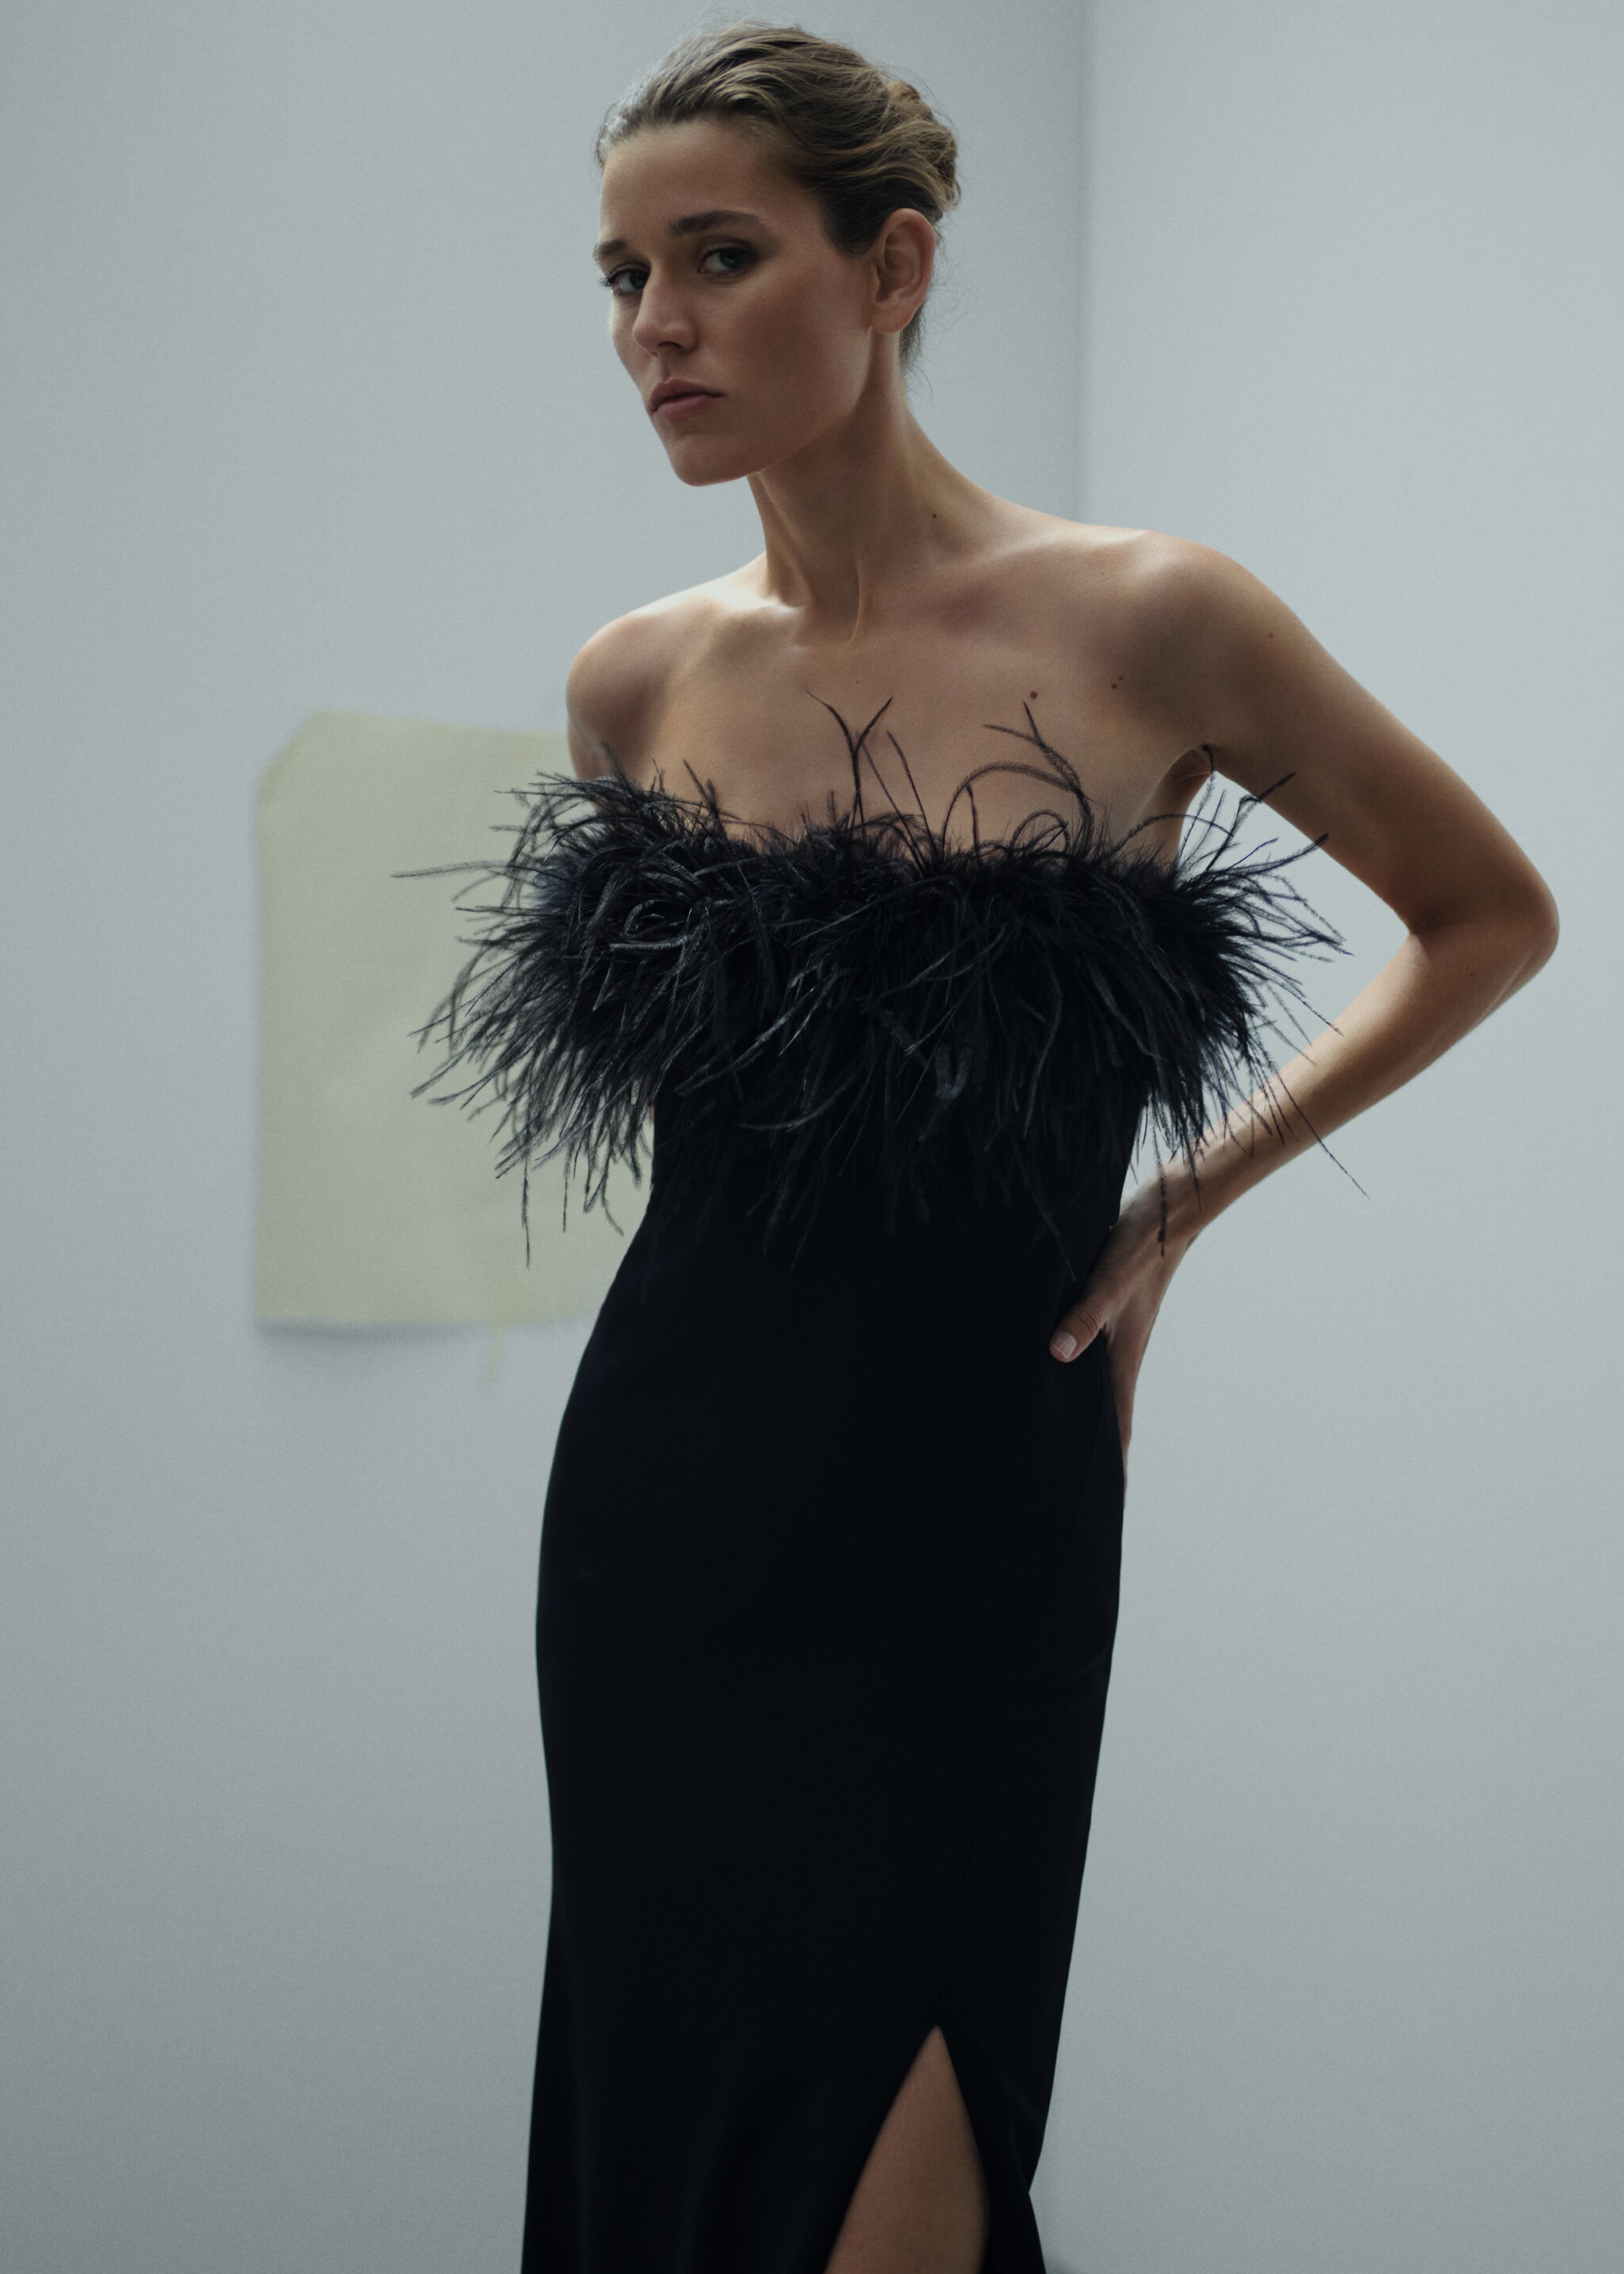 Strapless dress with feather detail - Medium plane